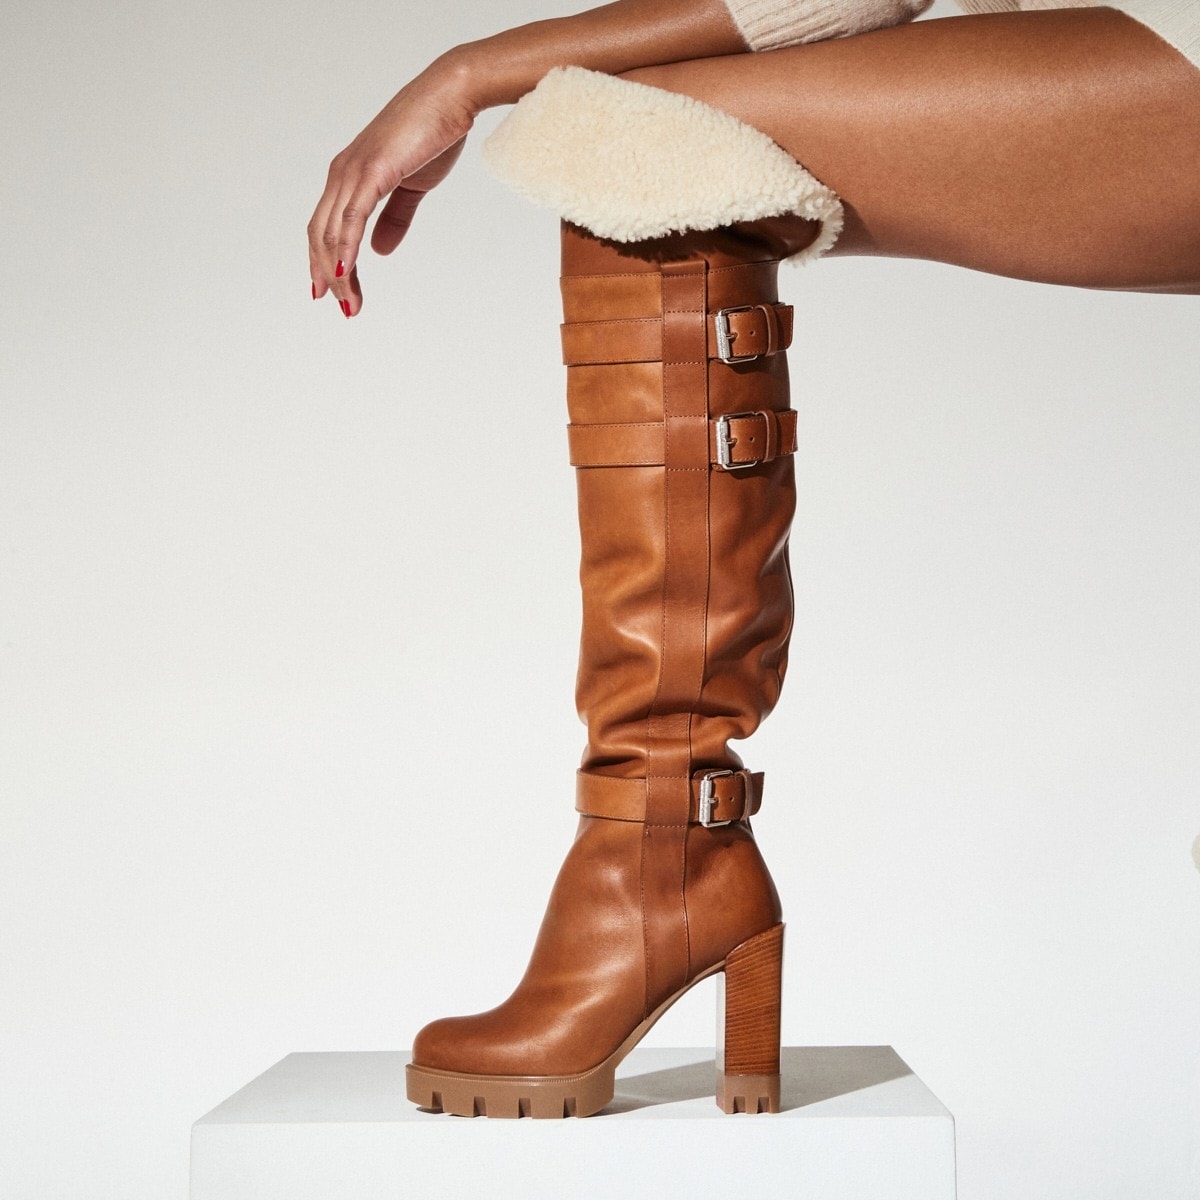 This luxurious boot is meticulously crafted from Terra brown waxed leather, beautifully complemented by white wool encasing the leg, creating a sophisticated and stylish look